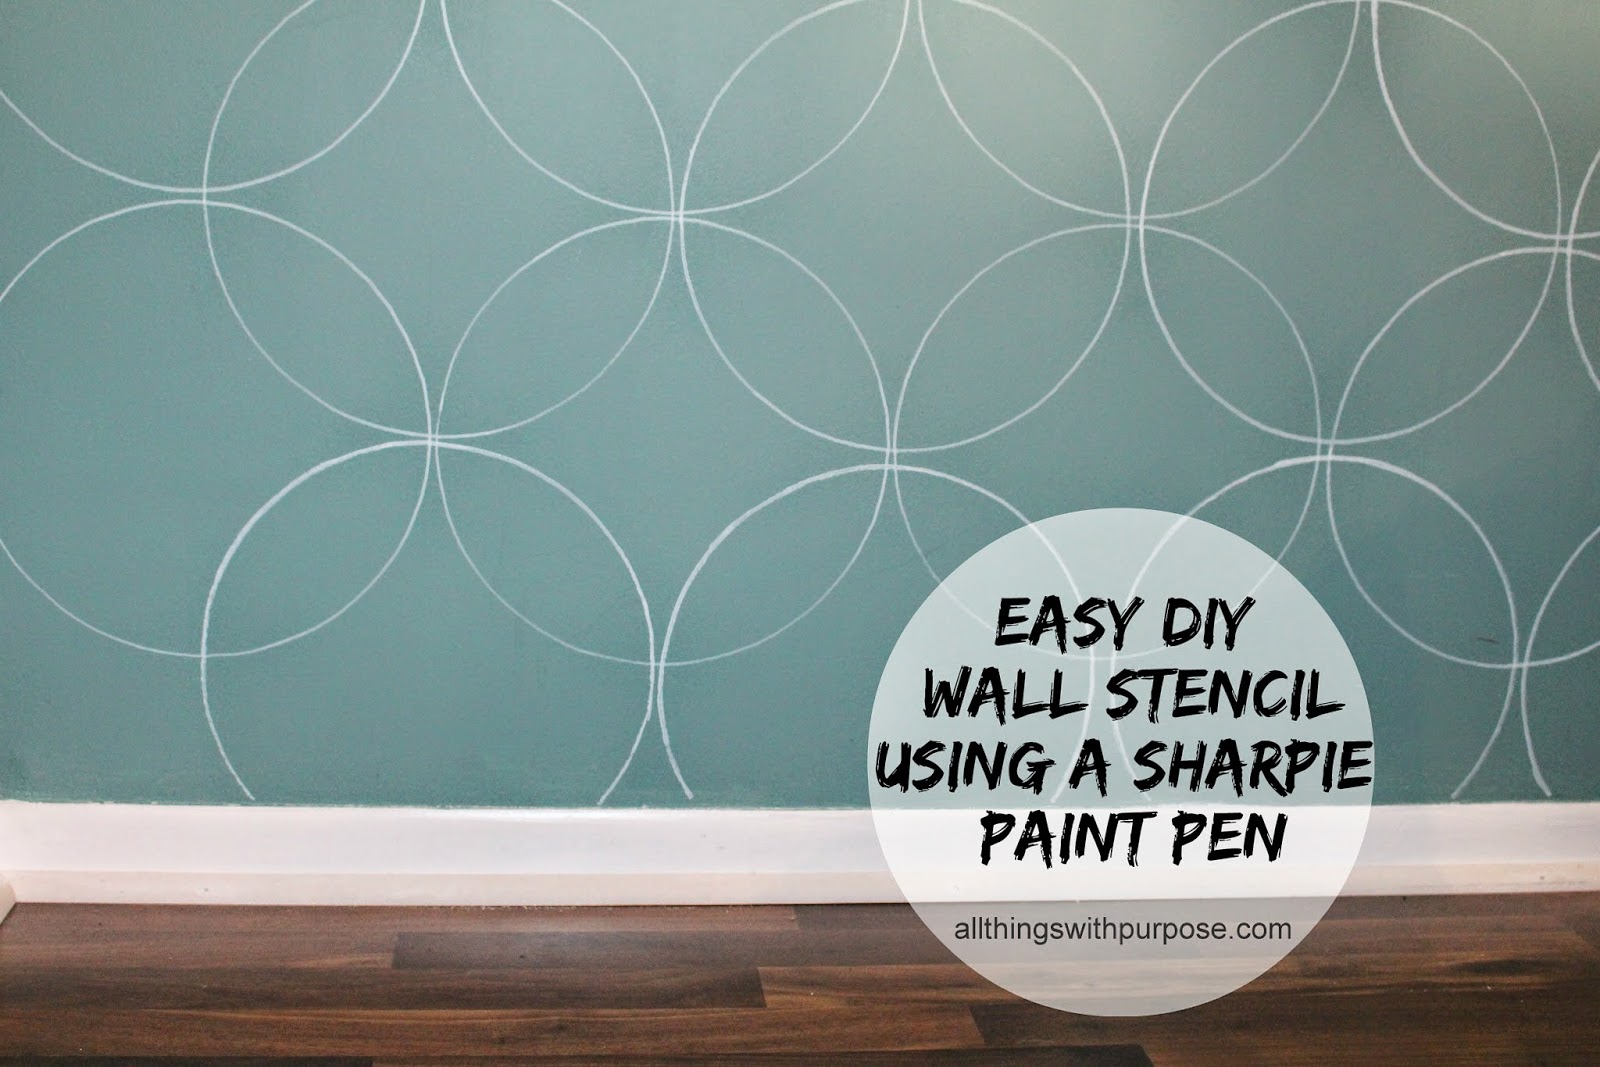 Wall Stencils - Photos All Recommendation